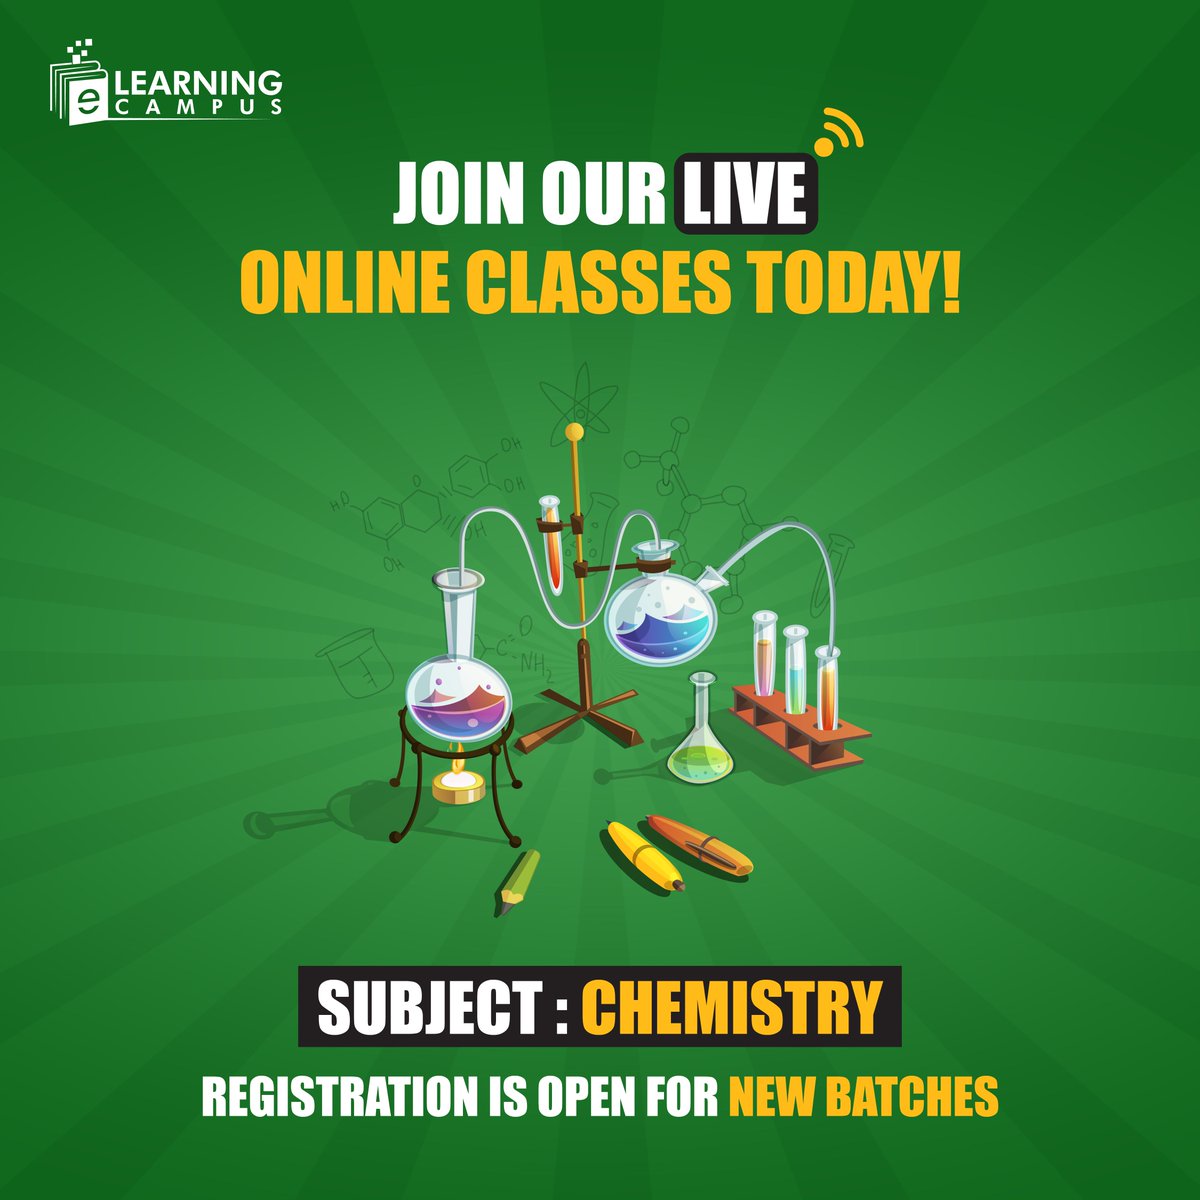 Level up your learning! 📚 Join our live online Chemistry classes today! 🧪✨ 
Don't miss out on the chance to ace chemistry with us! 💻🔬 

#GCSE #OnlineLearning #elearningcampus #ChemistryClass #RegisterNow